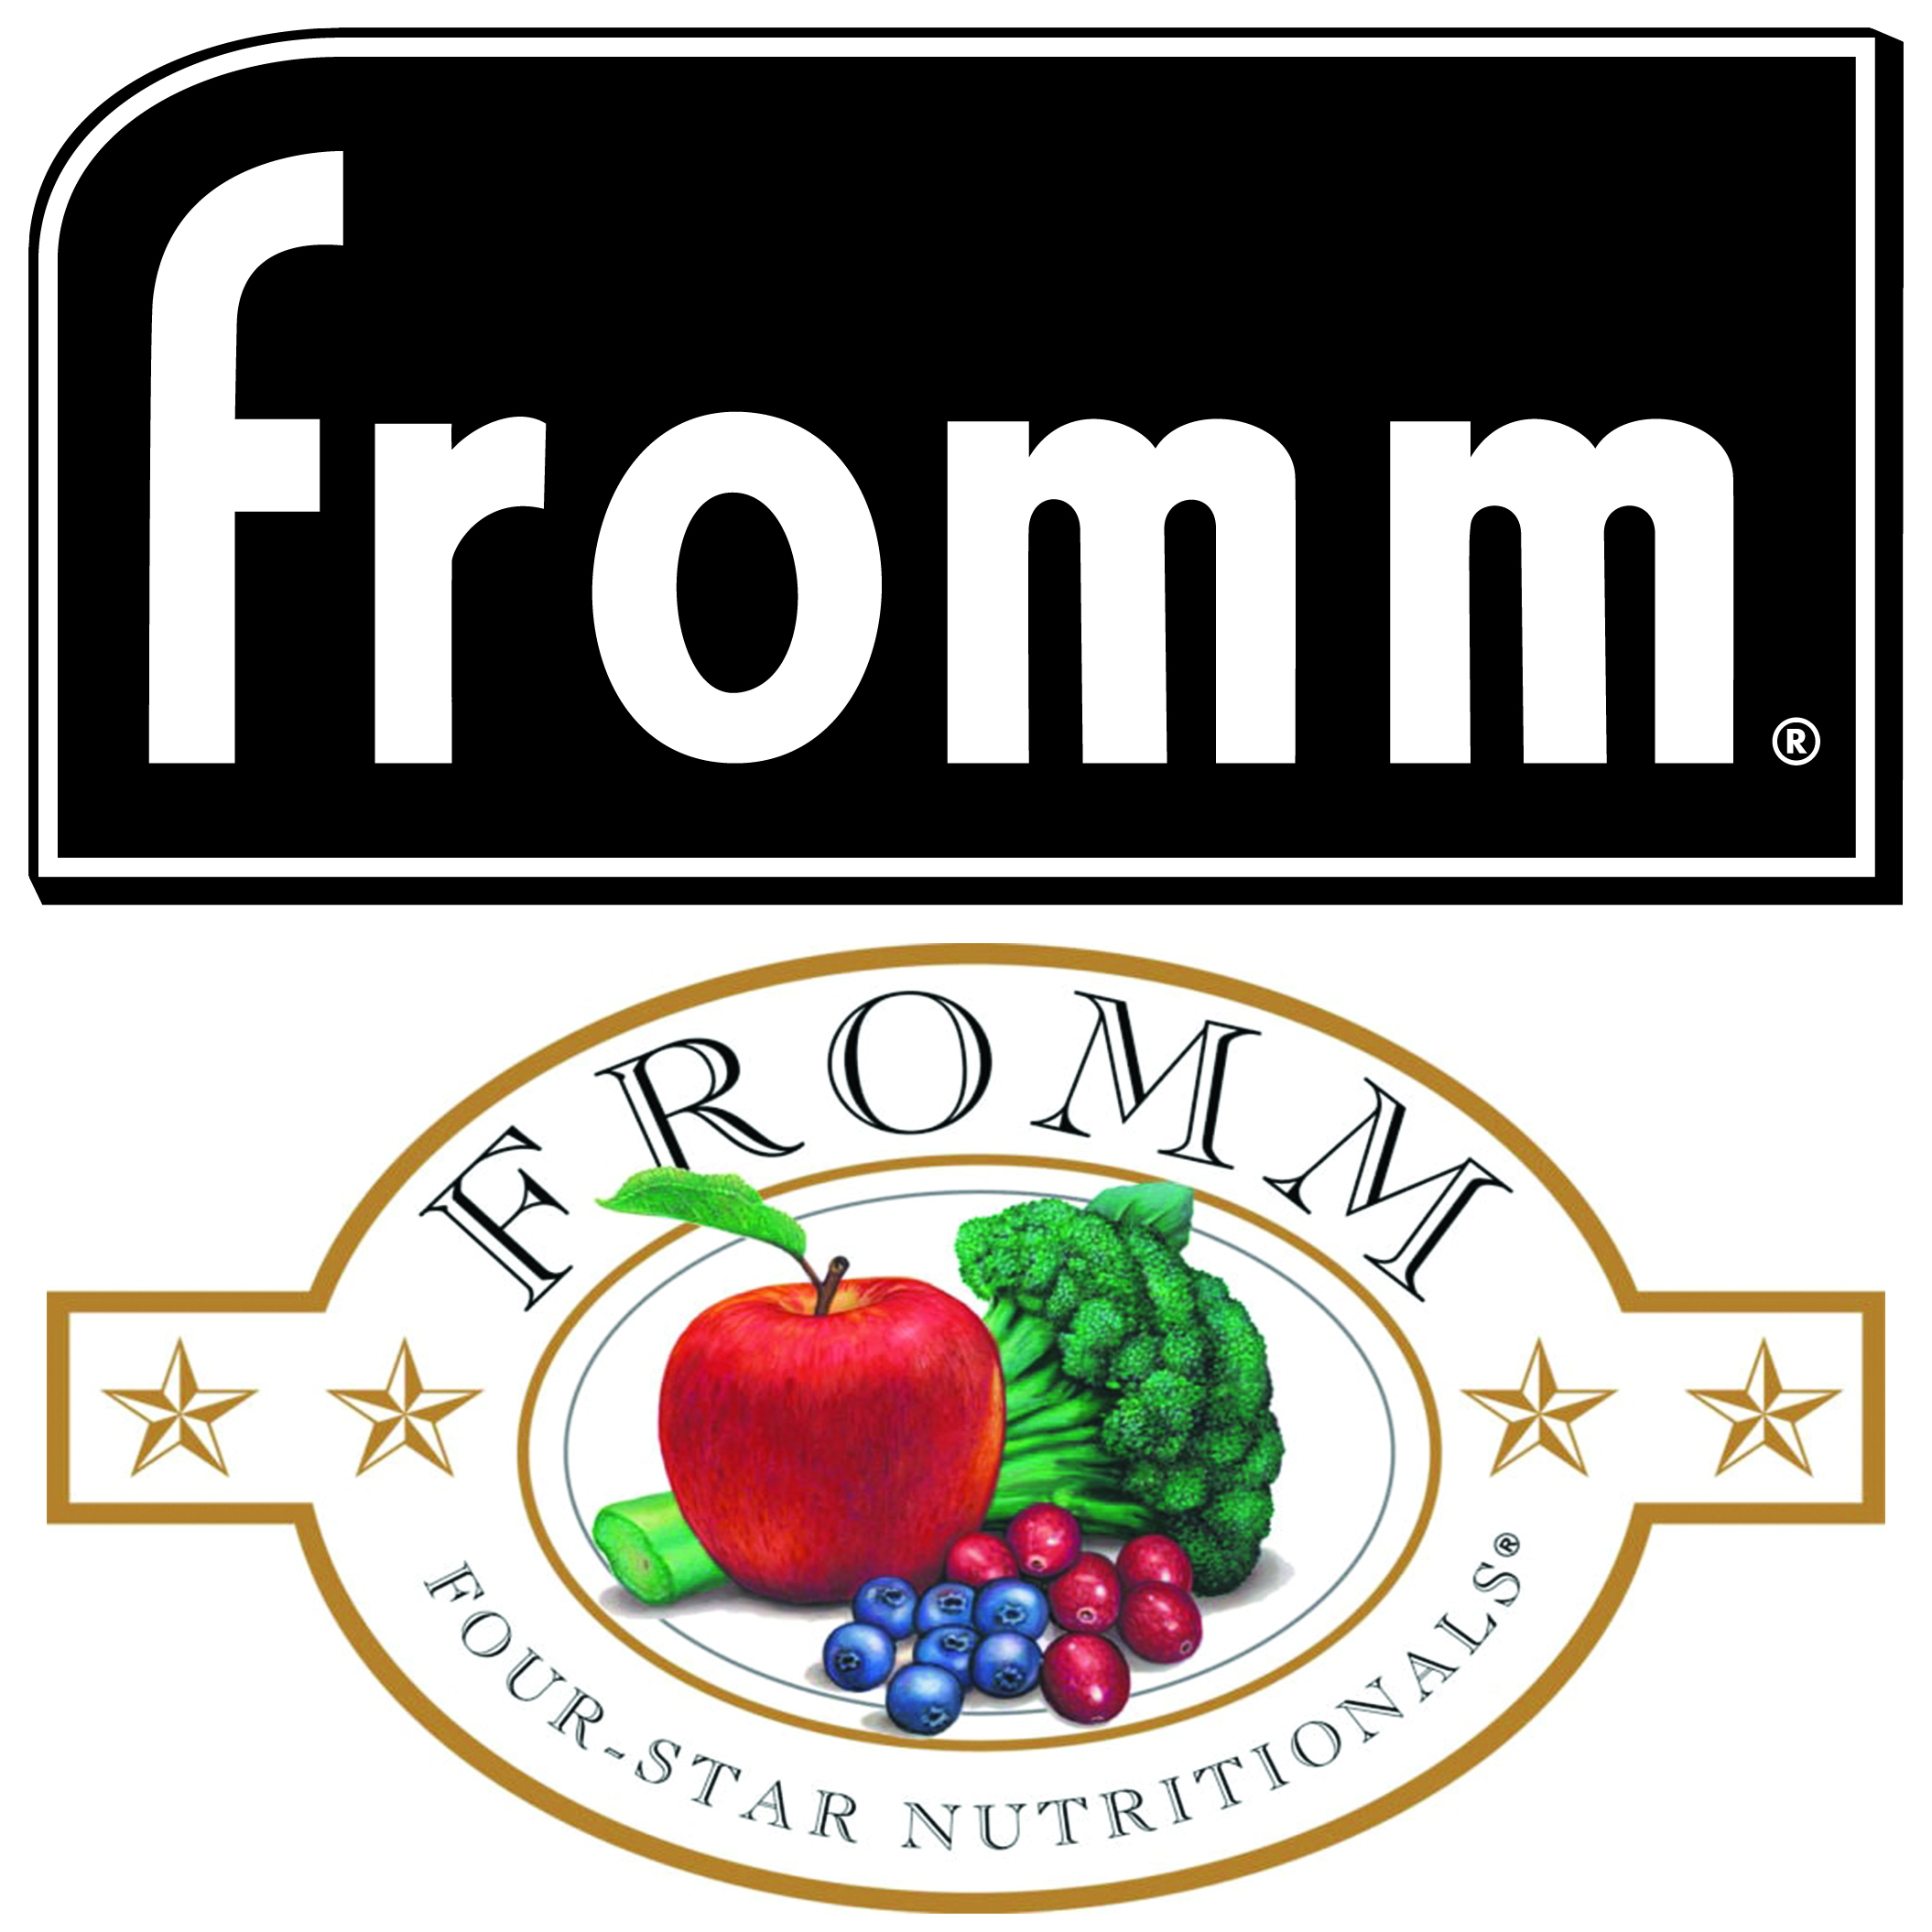 fromm four star game bird dog food